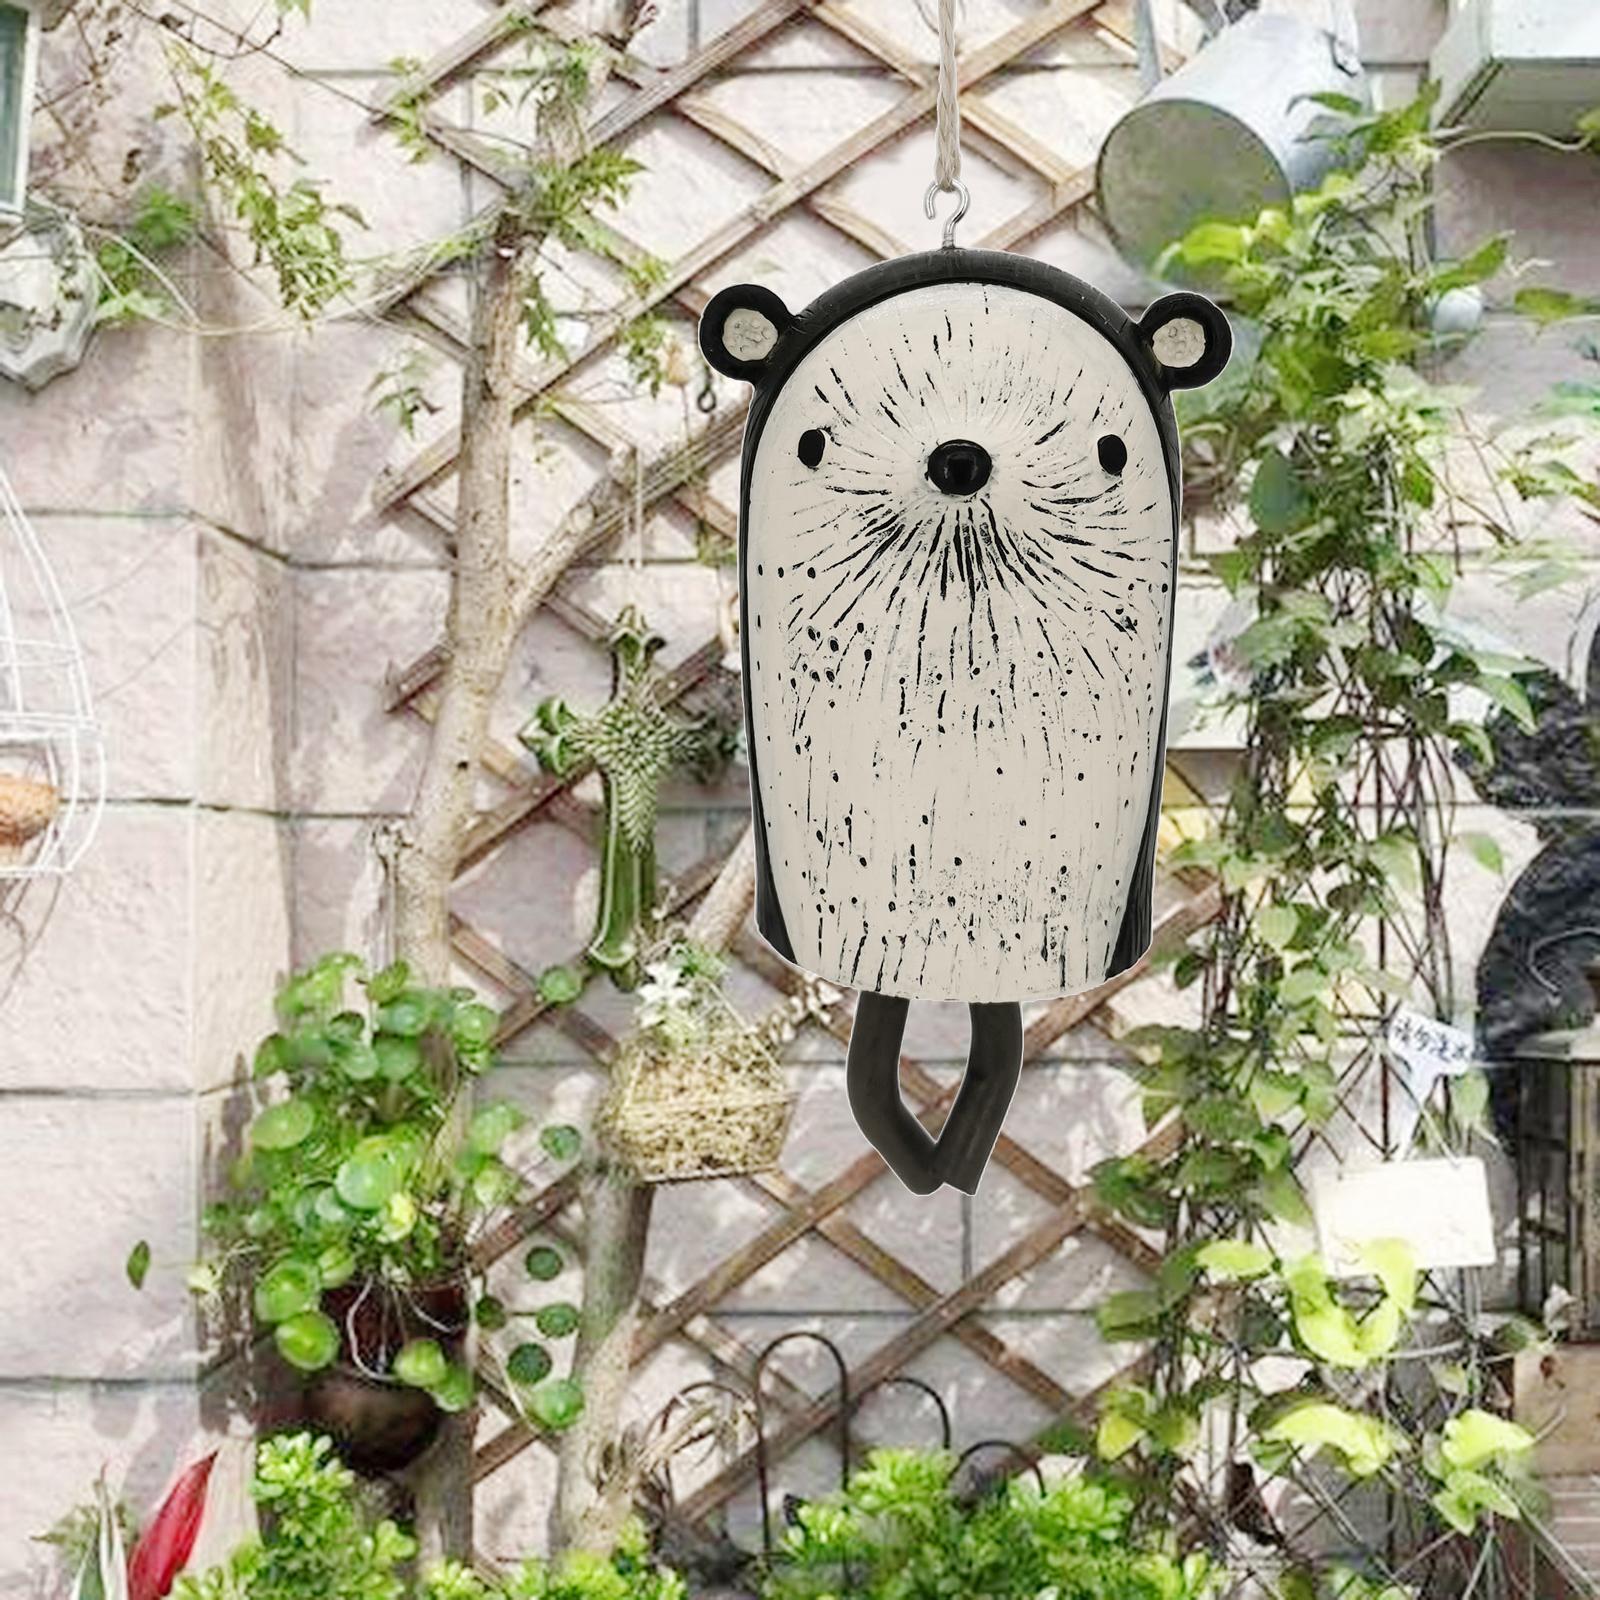 Cute Rustic Animal Wind Chimes Hanging Aeolian Bell for Gift Garden Decor I